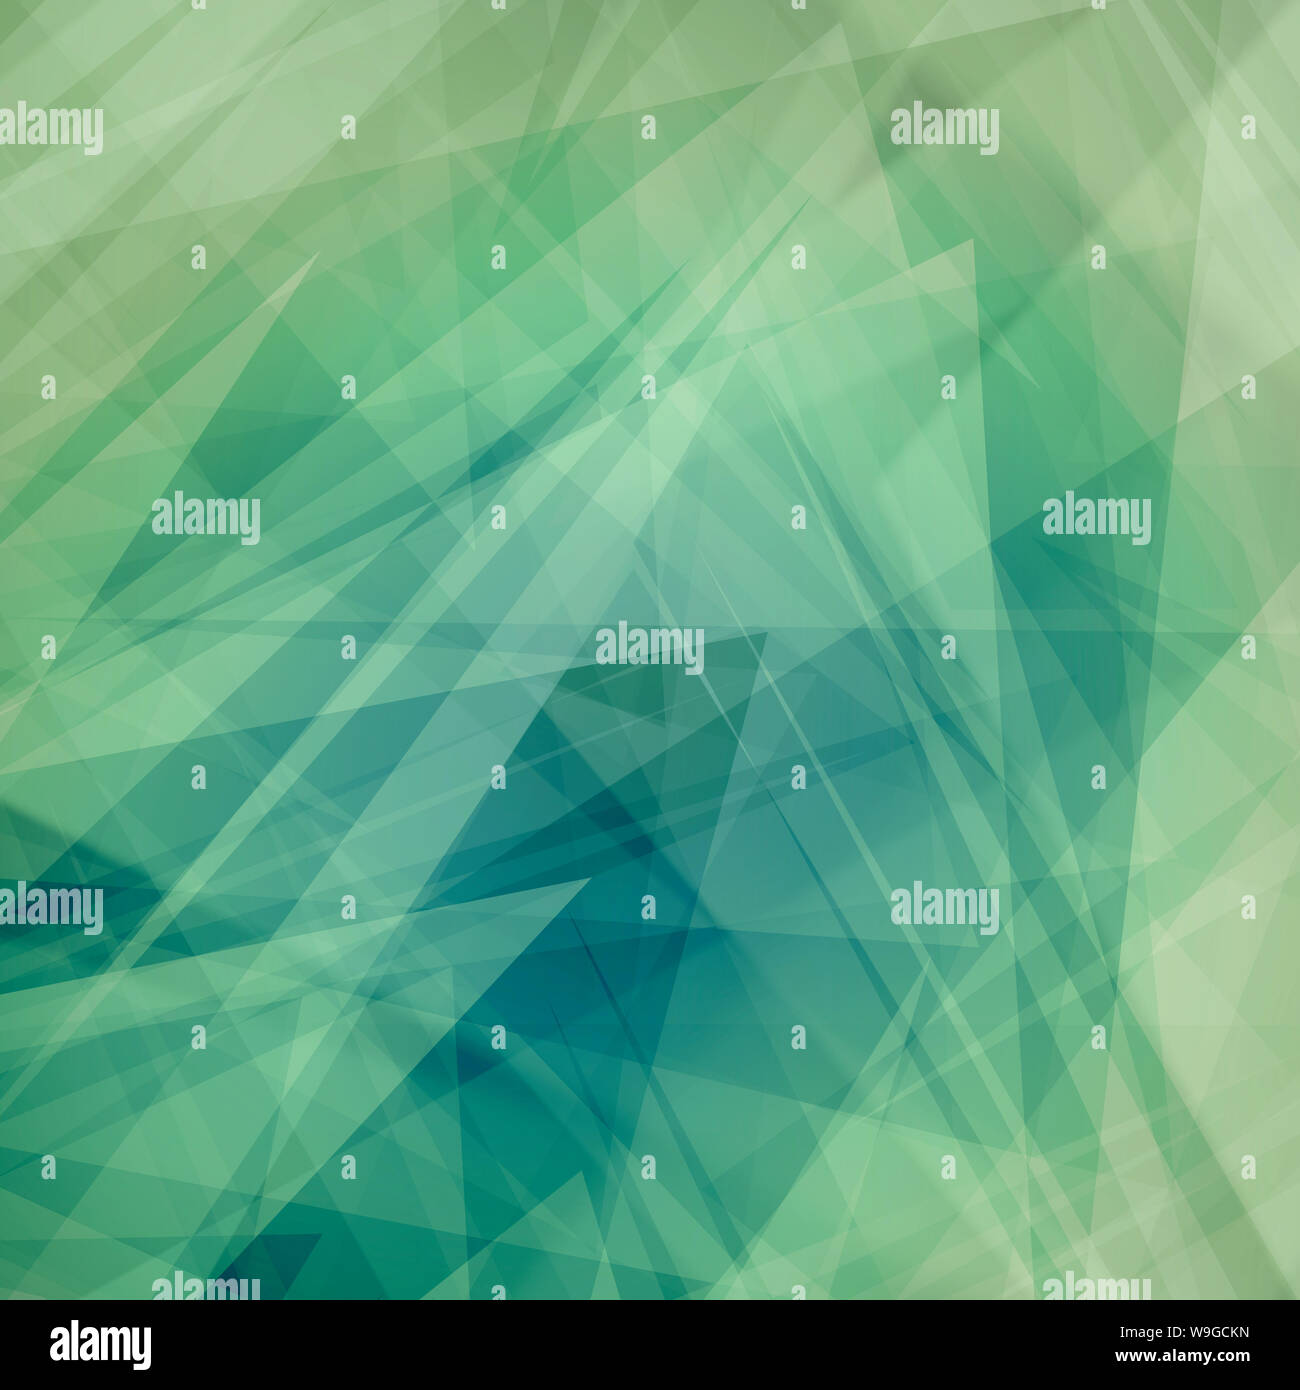 abstract background with layers of triangles, polygons, stripes and random shapes of white blue and green colors in modern art style design Stock Photo